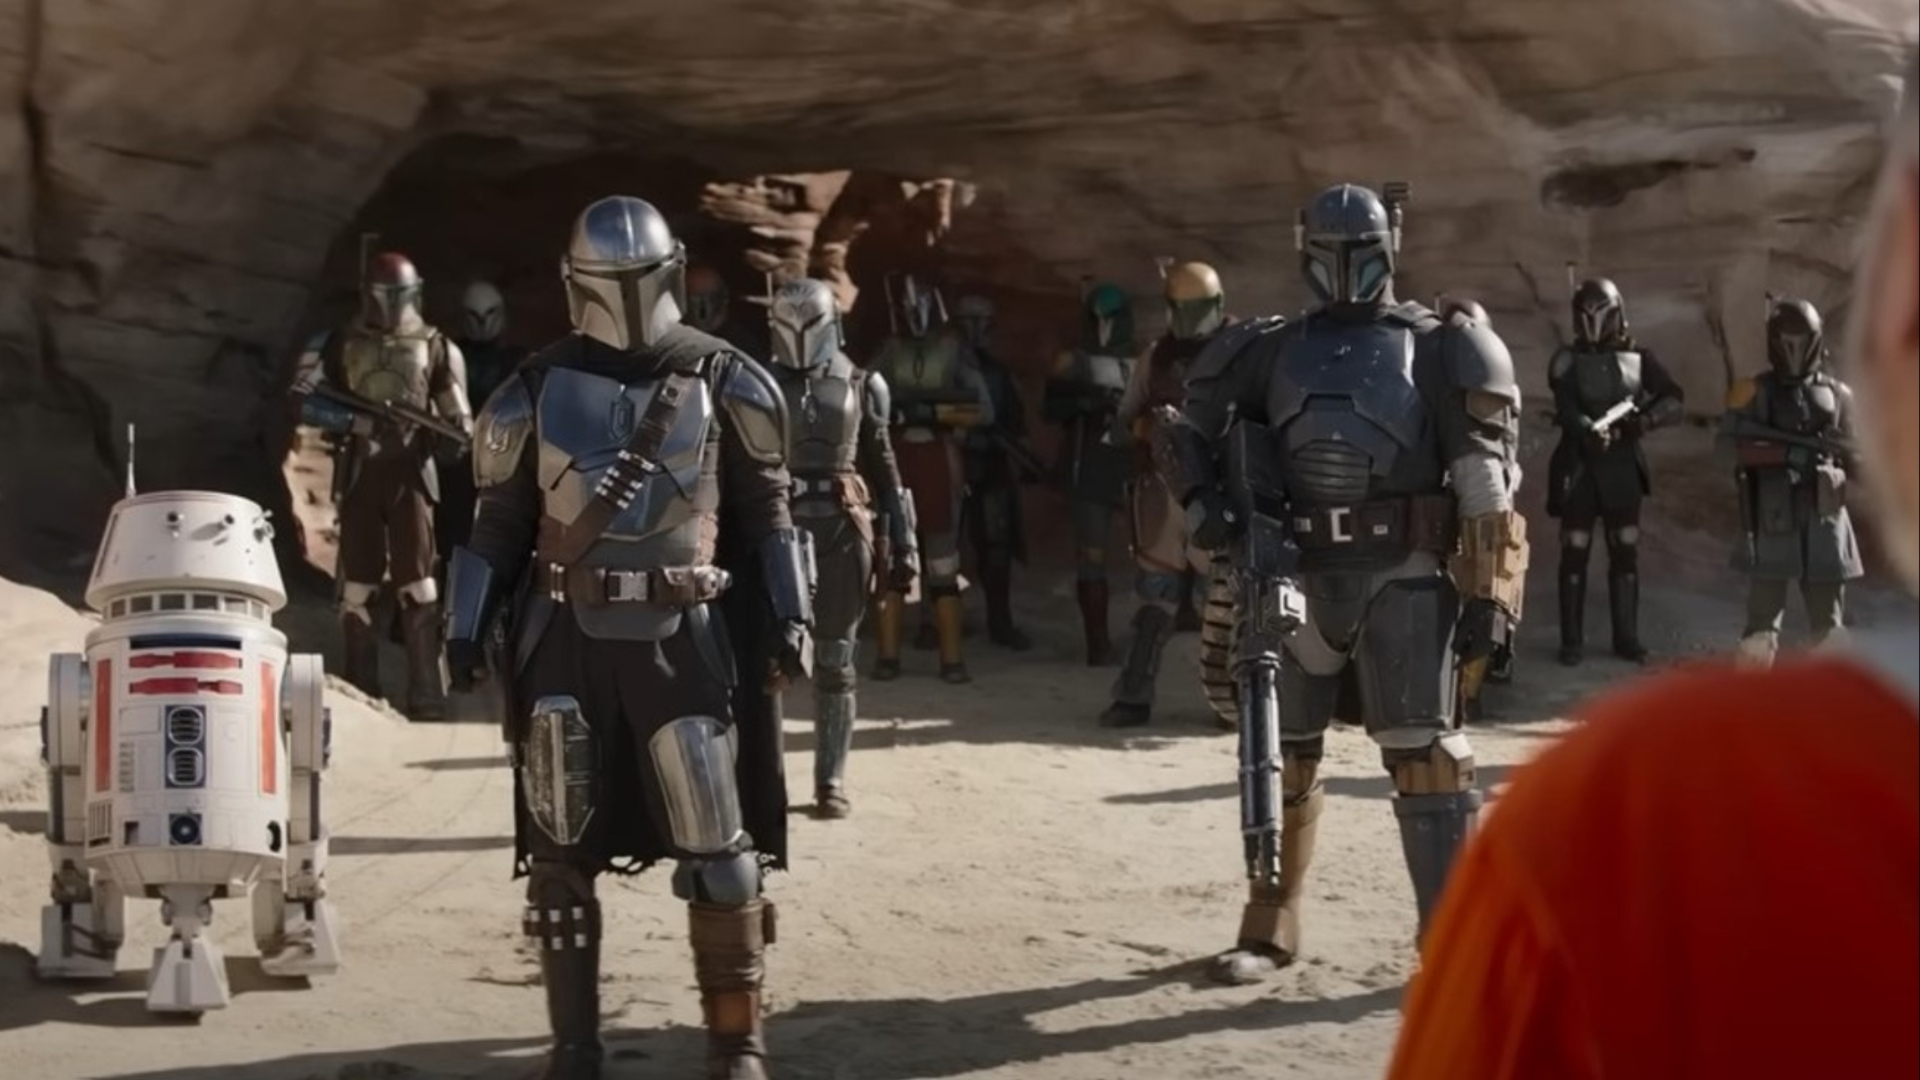 The Mandalorian season 3 episodes, ranked from worst to best